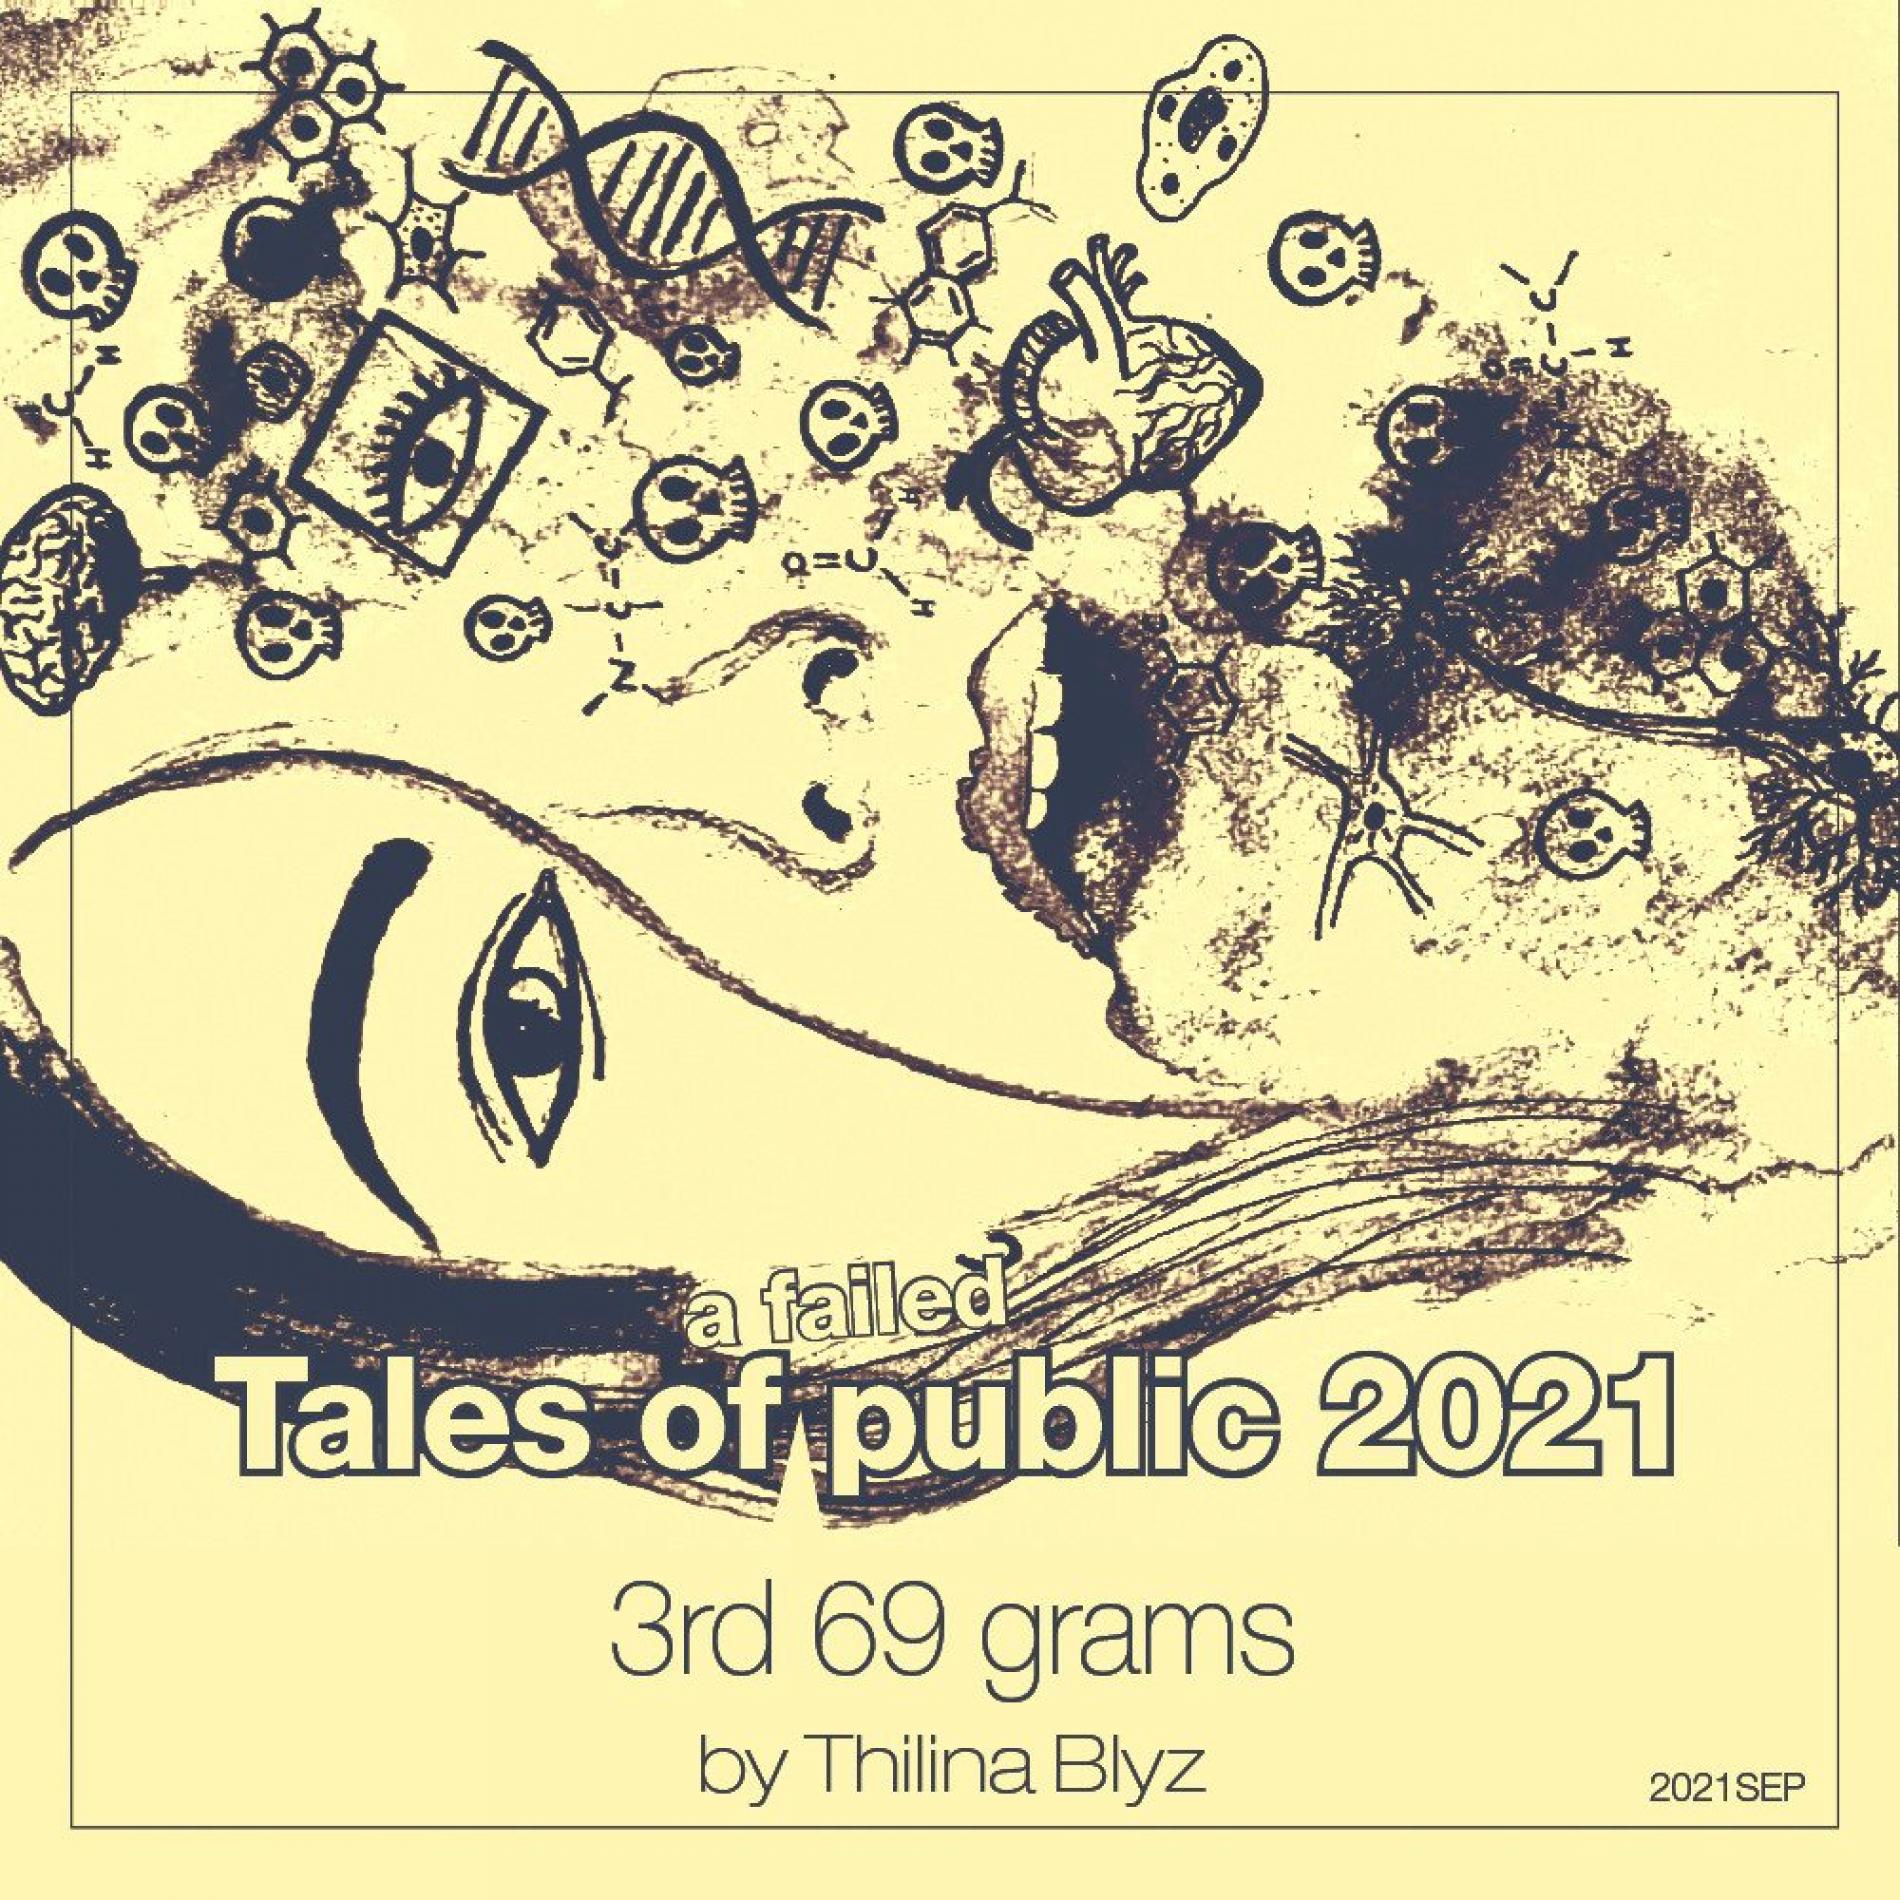 New Ep : Thilina Blyz – Tales Of A Failed Public 2021